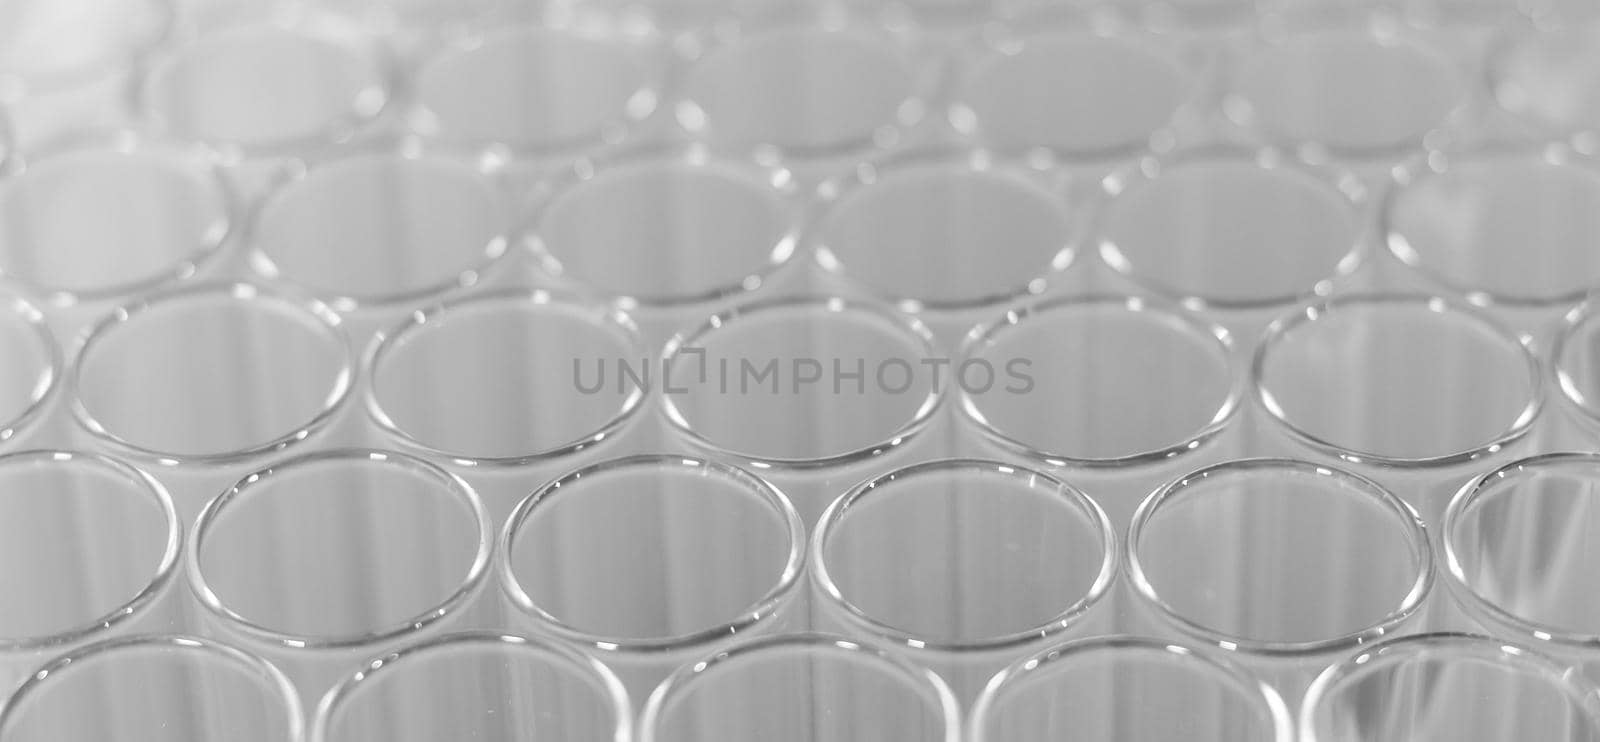 Close up of clean test glasses in chemistry or science laboratory